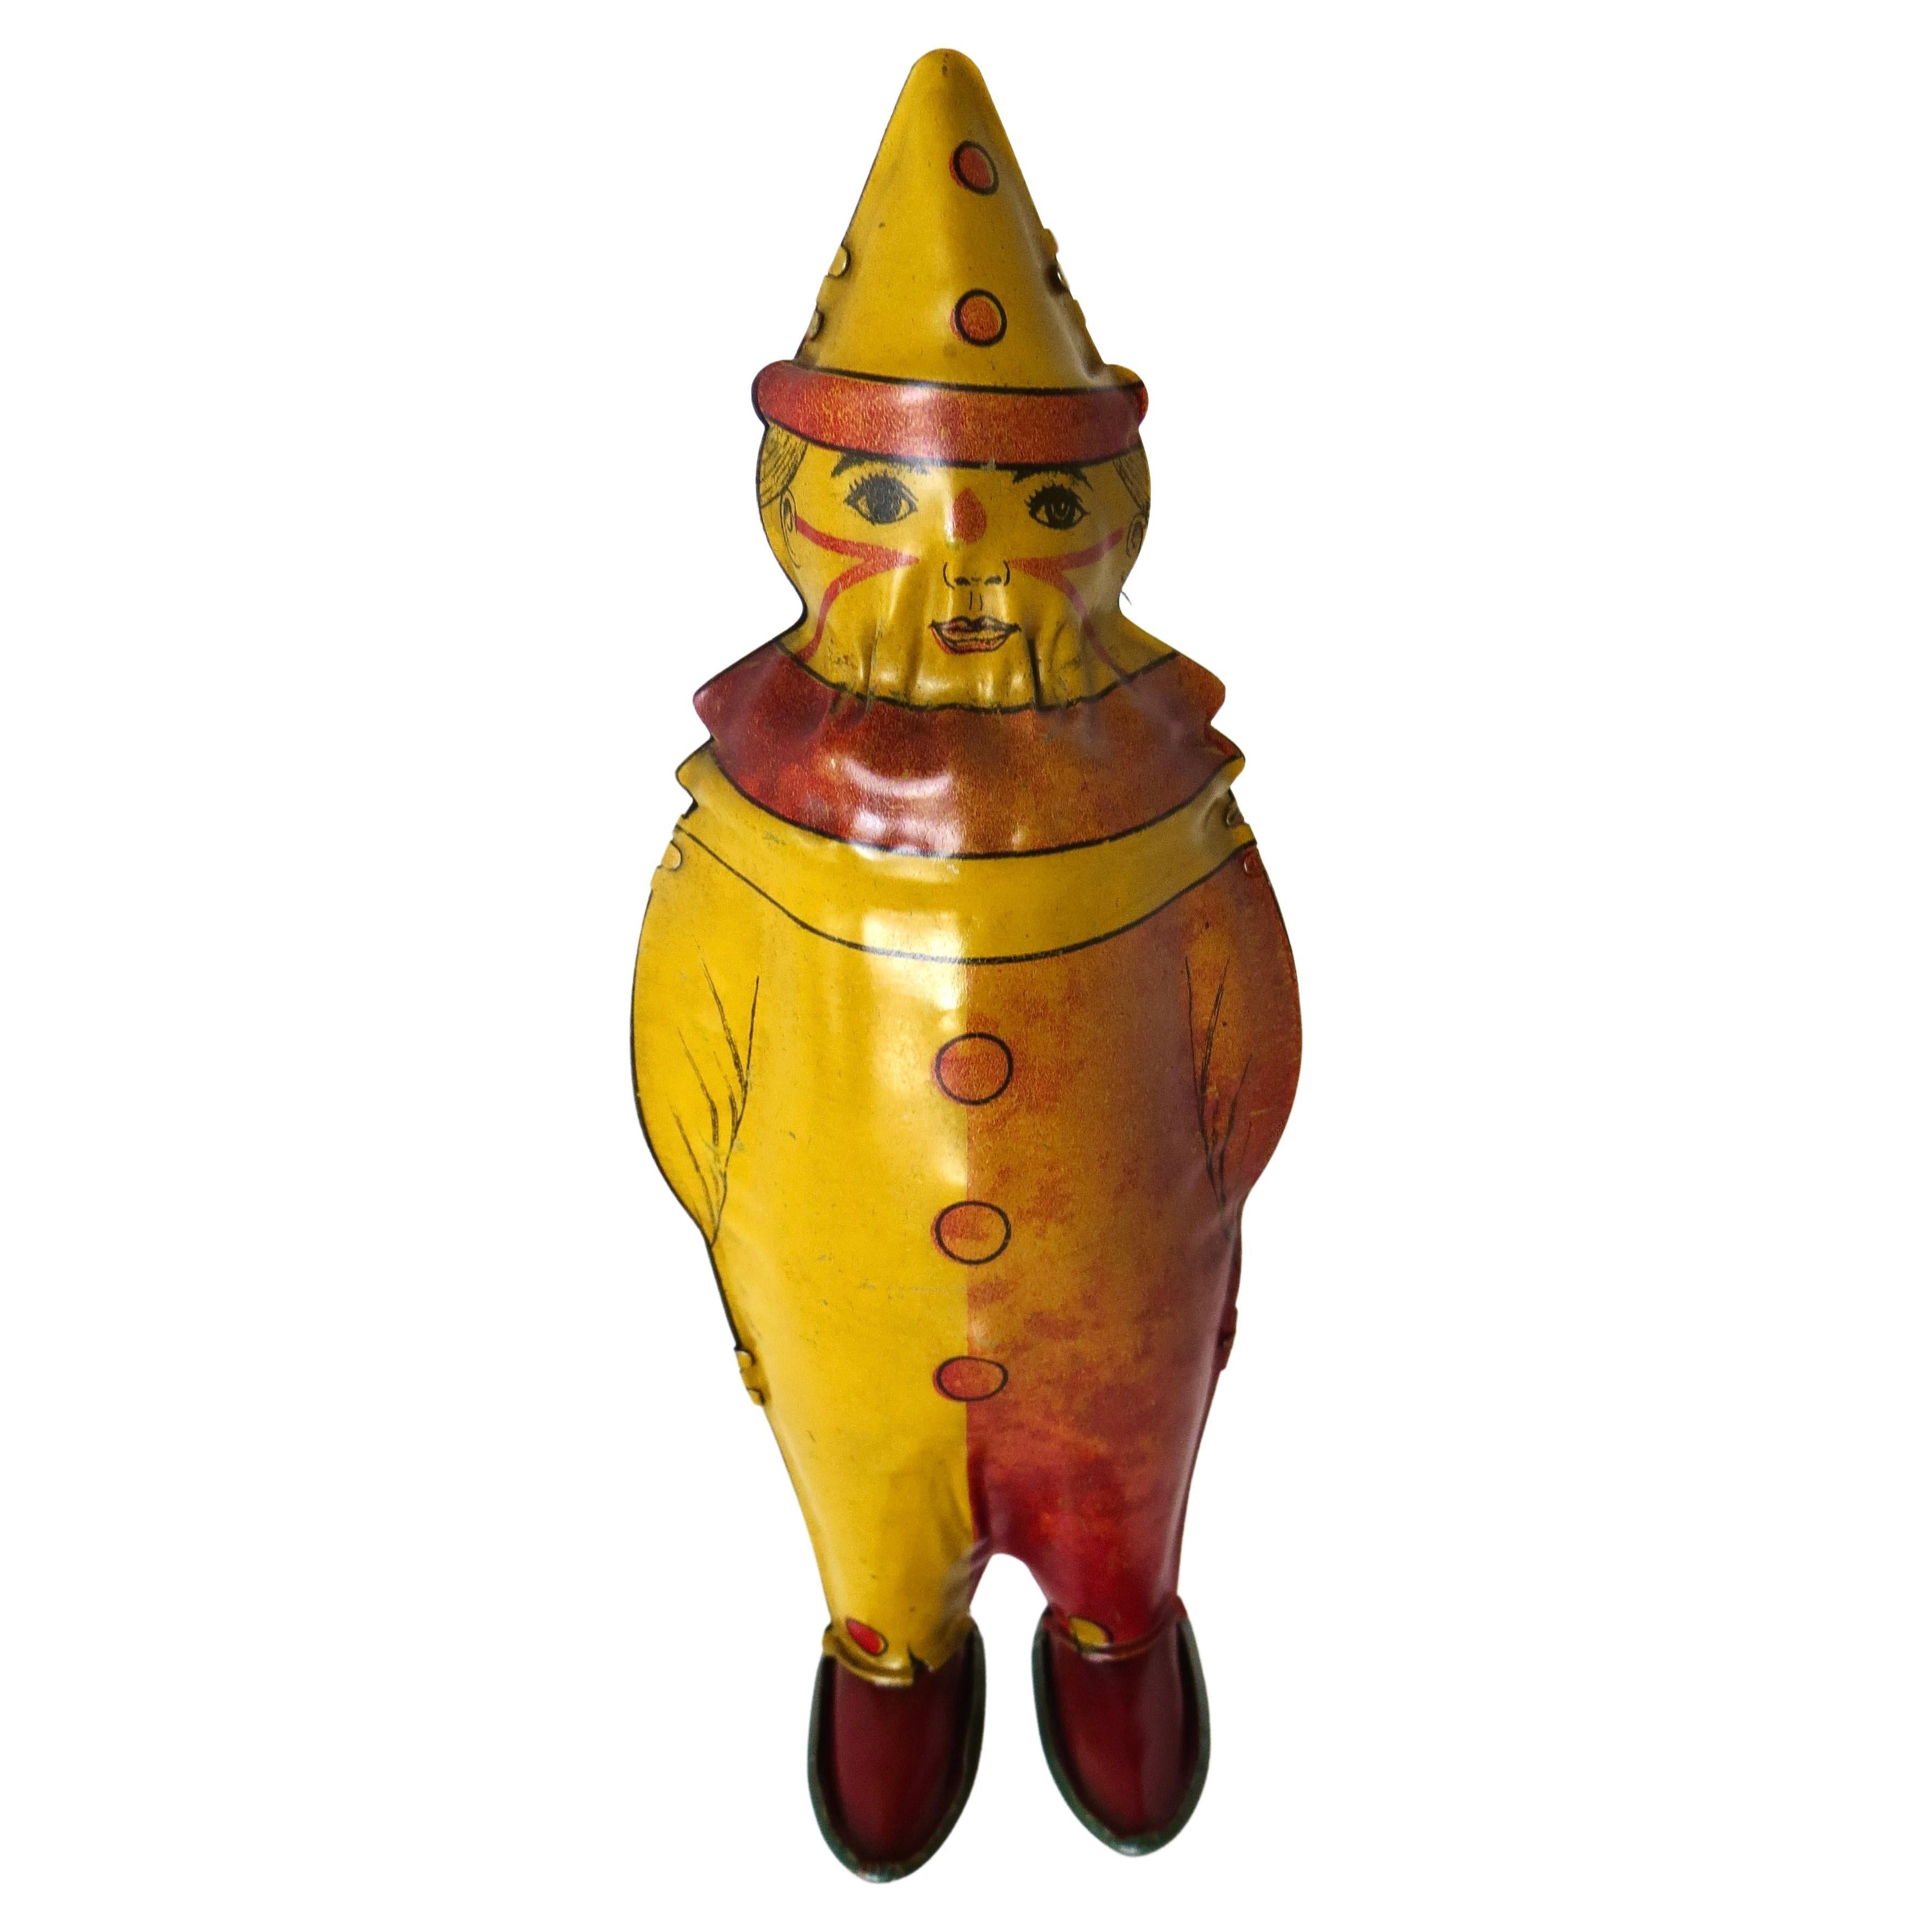 Vintage Toy Wind-Up "Johnny" The Dancing Clown by Lindstrom Toy Co., Circa 1930 For Sale